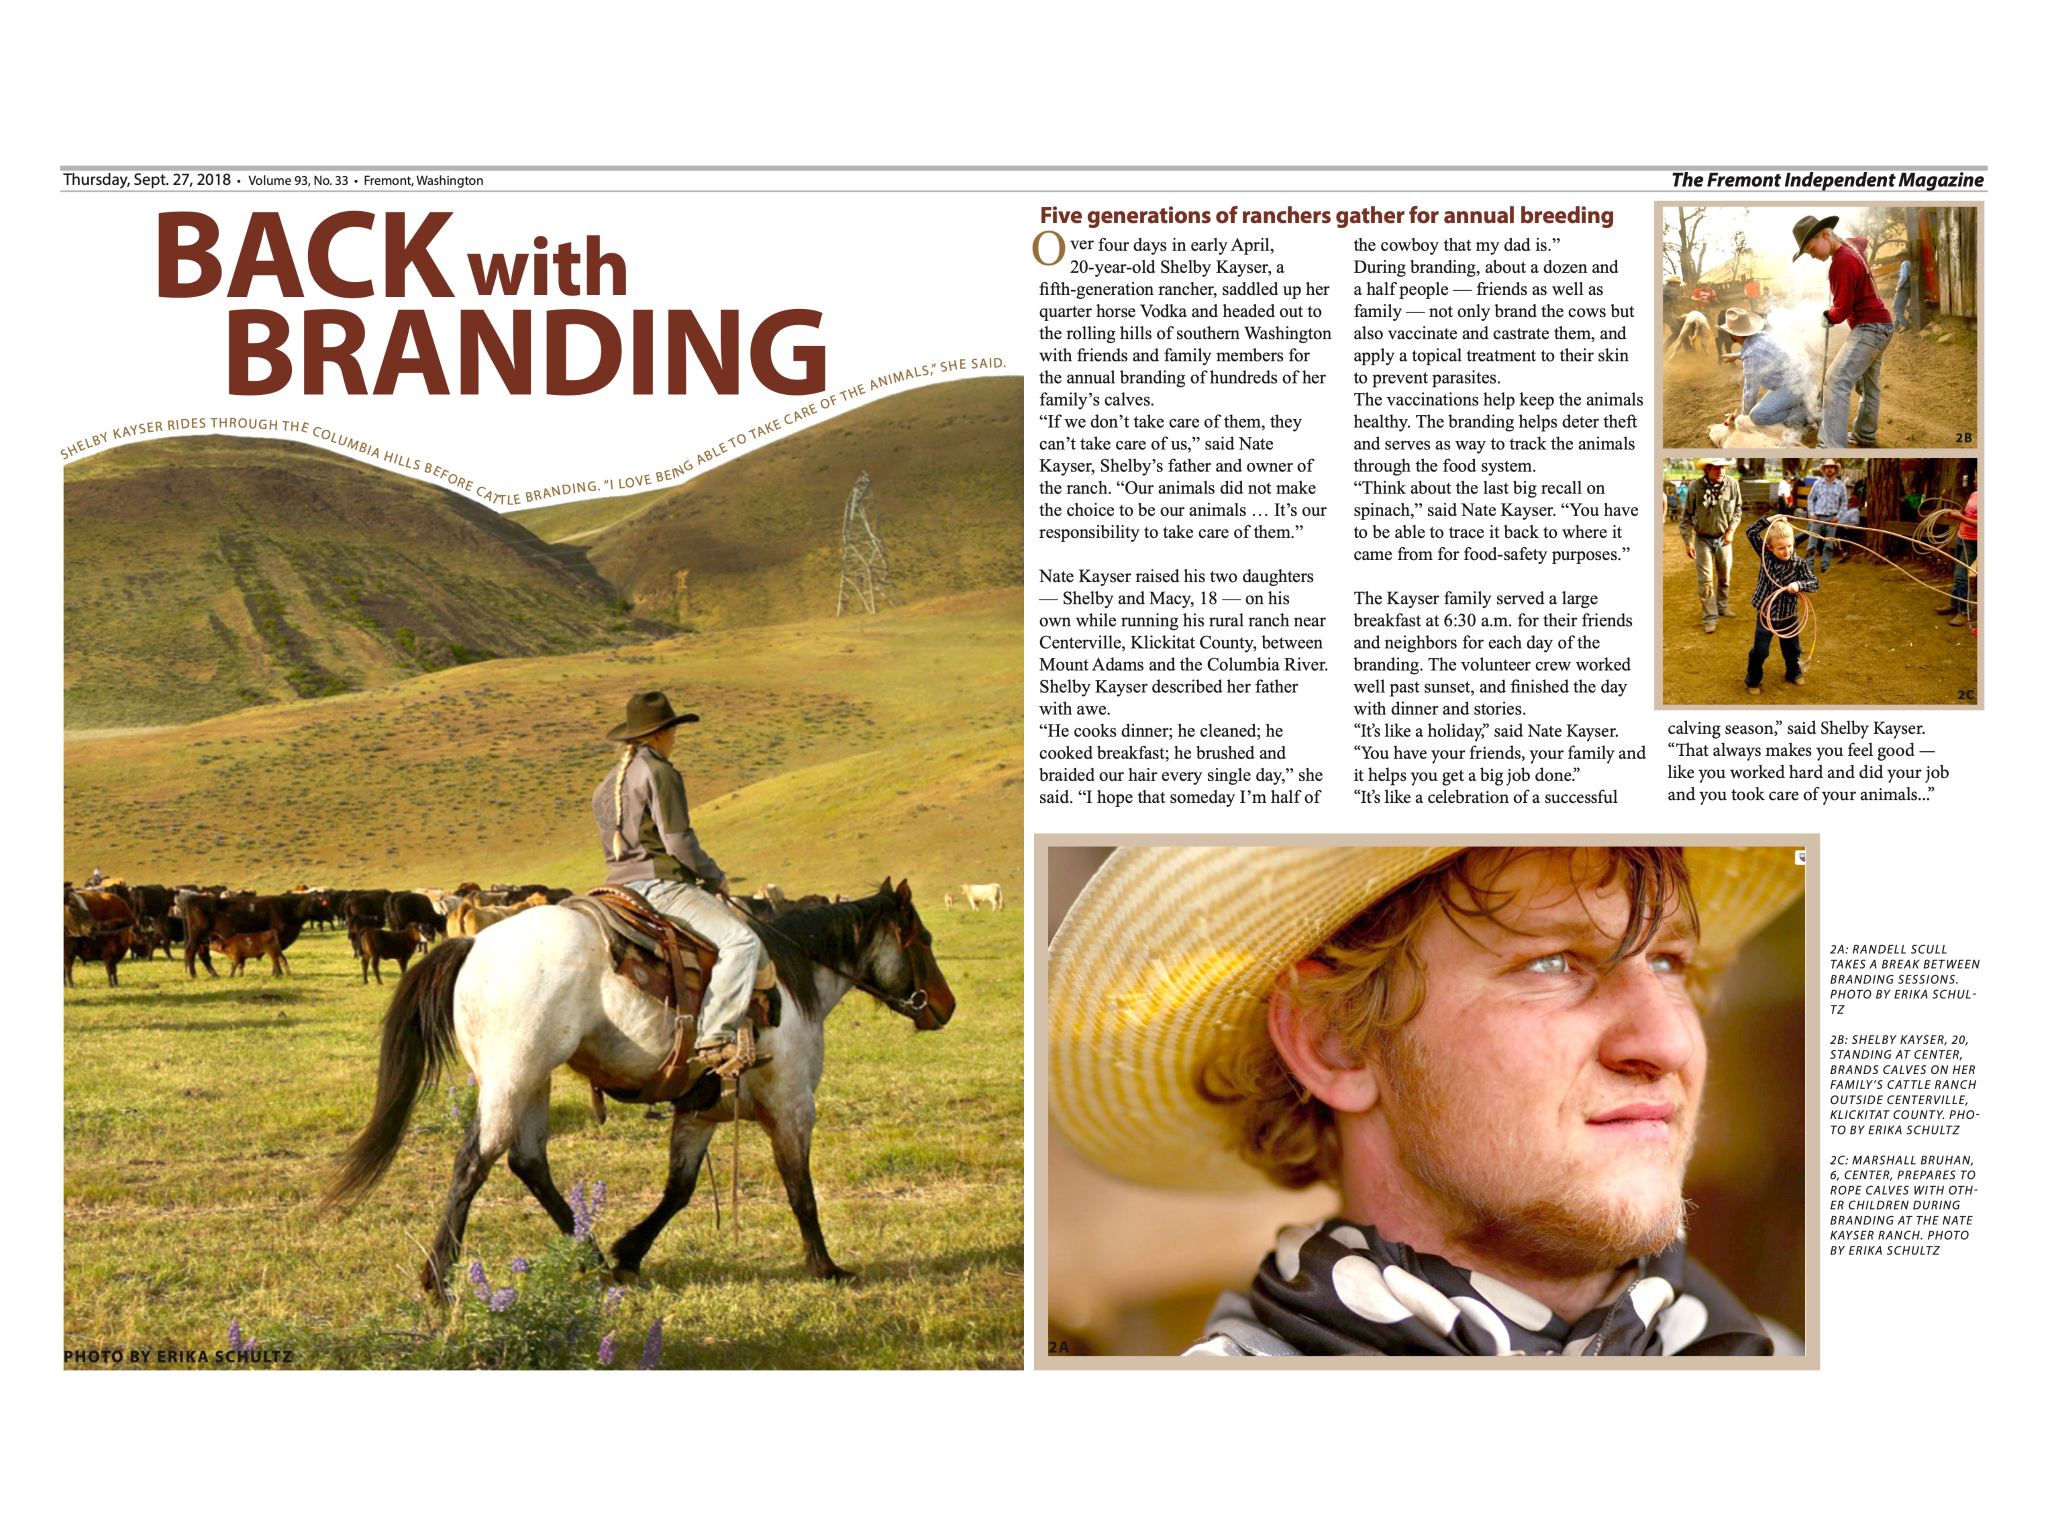 Cover of a magazine that reads 'Back with Branding' and shows cowboys